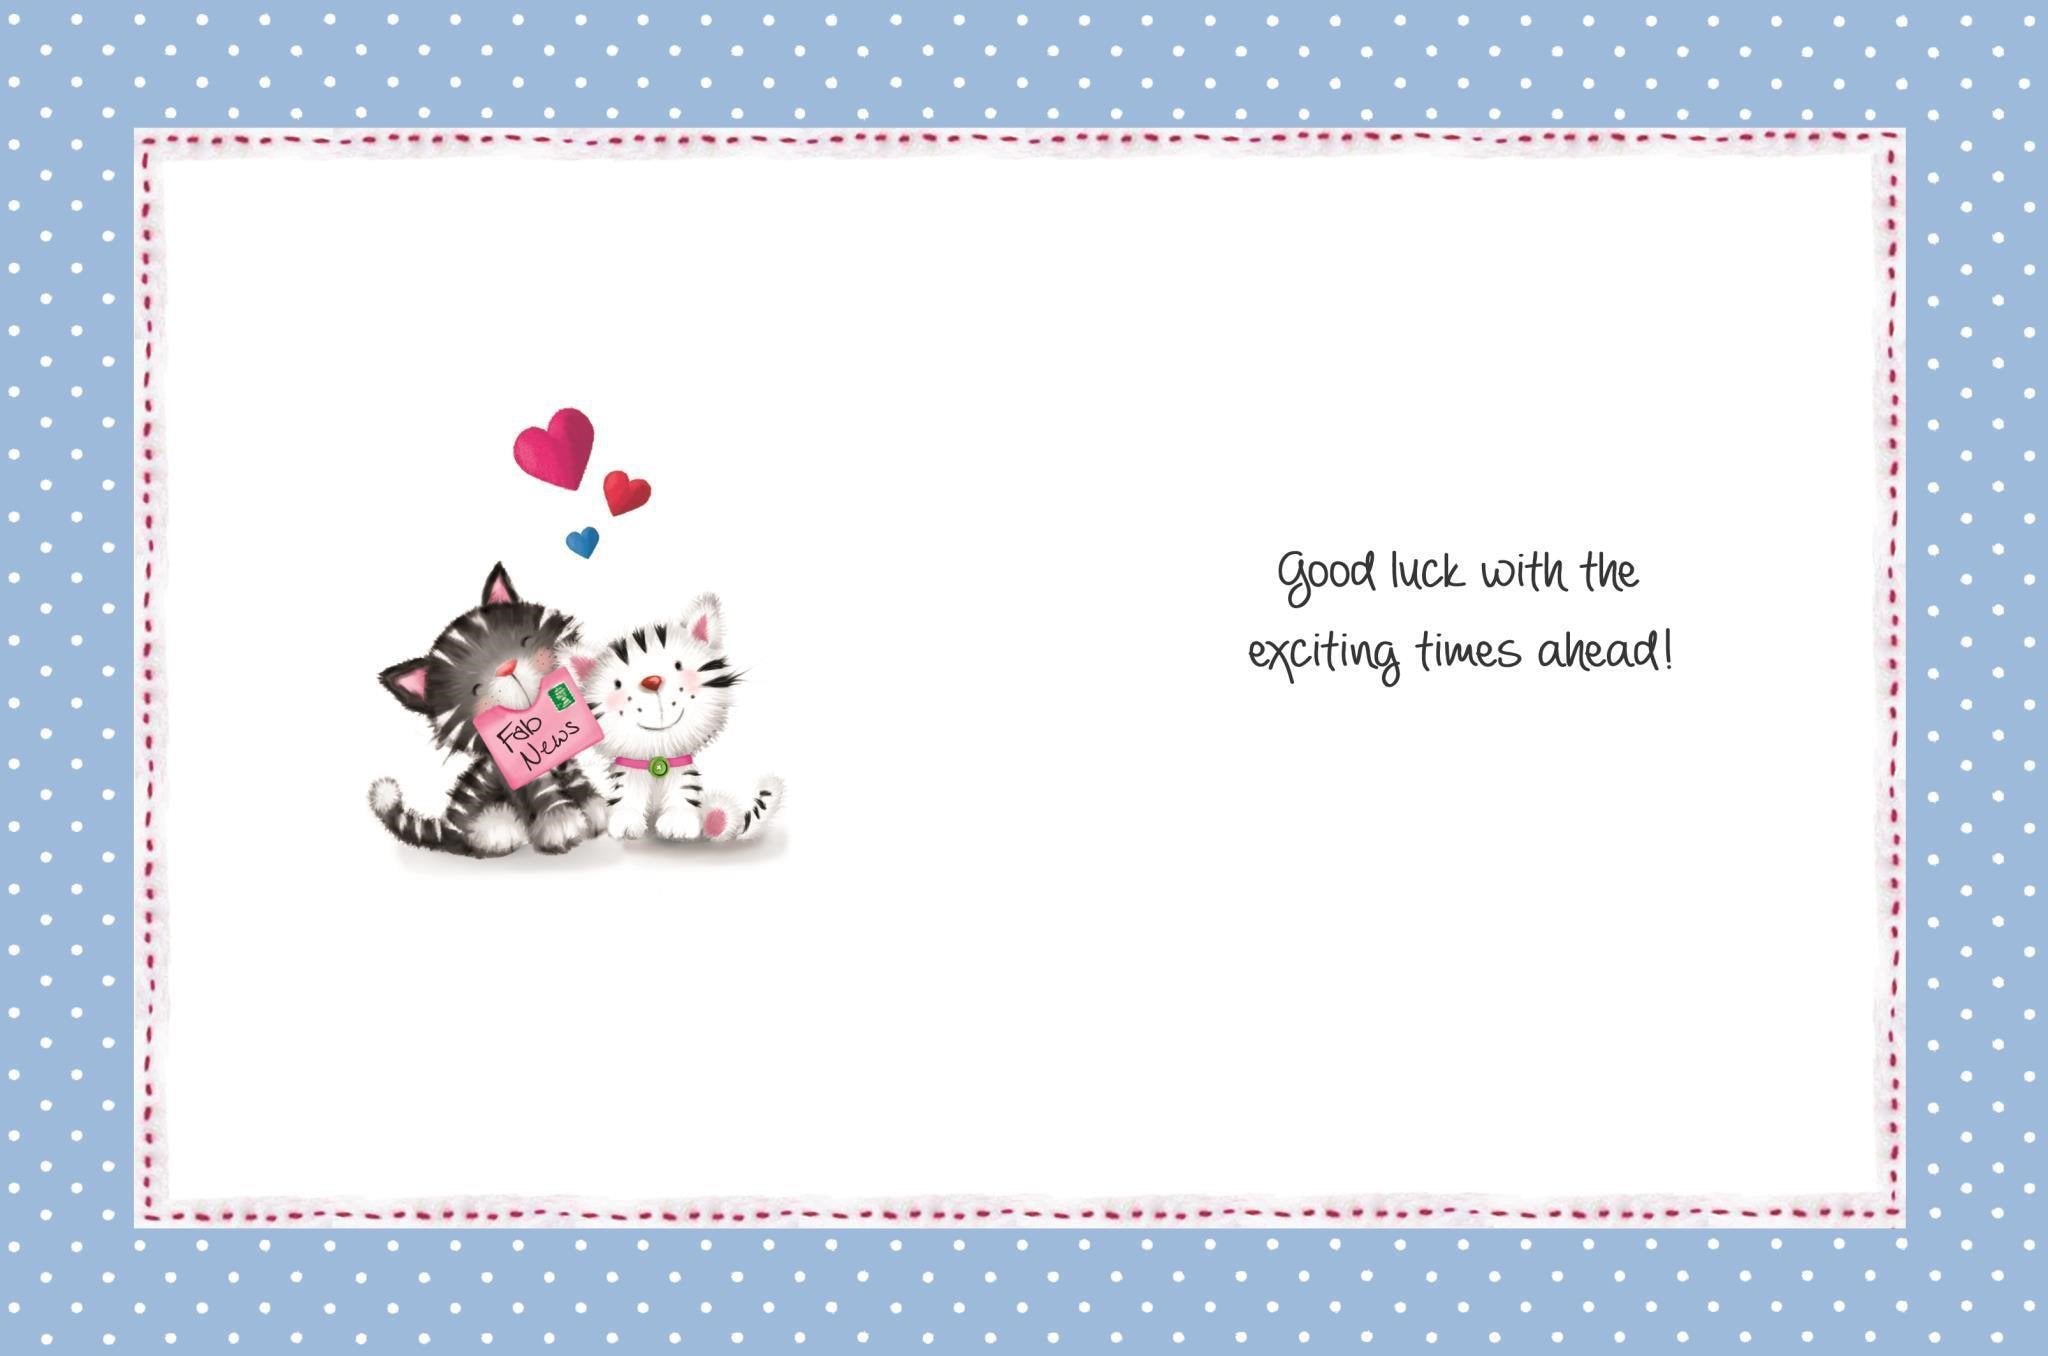 Inside of Engagement Wishes Cute Greetings Card